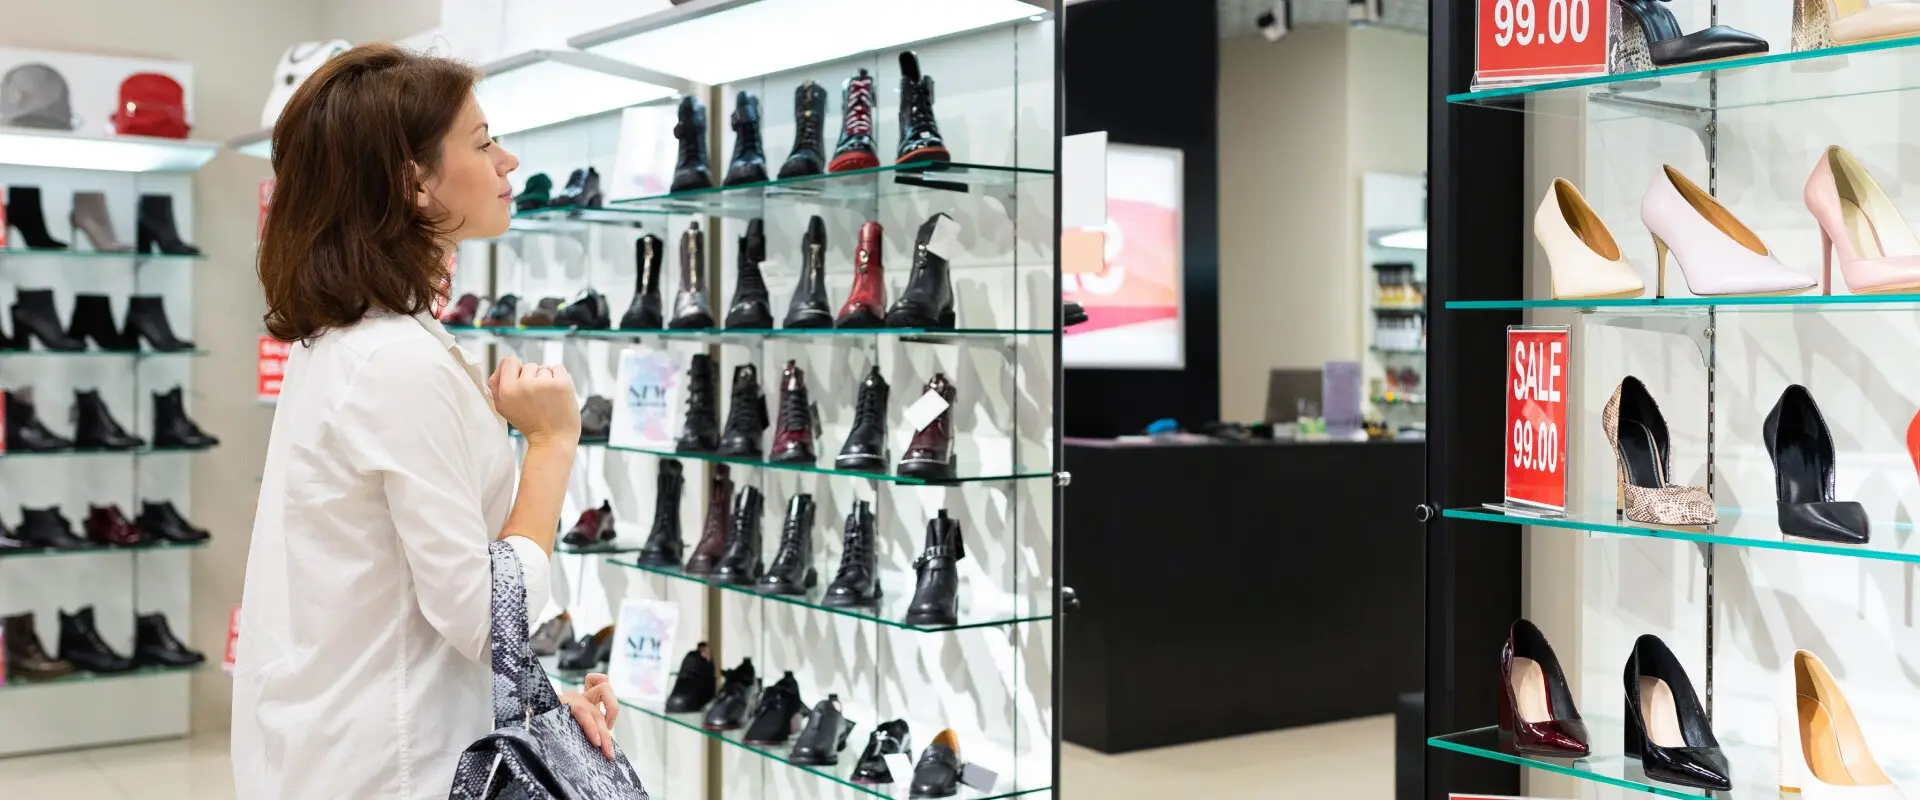 Stepping Up Footwear’s Business Innovations with Data Analytics Strategies